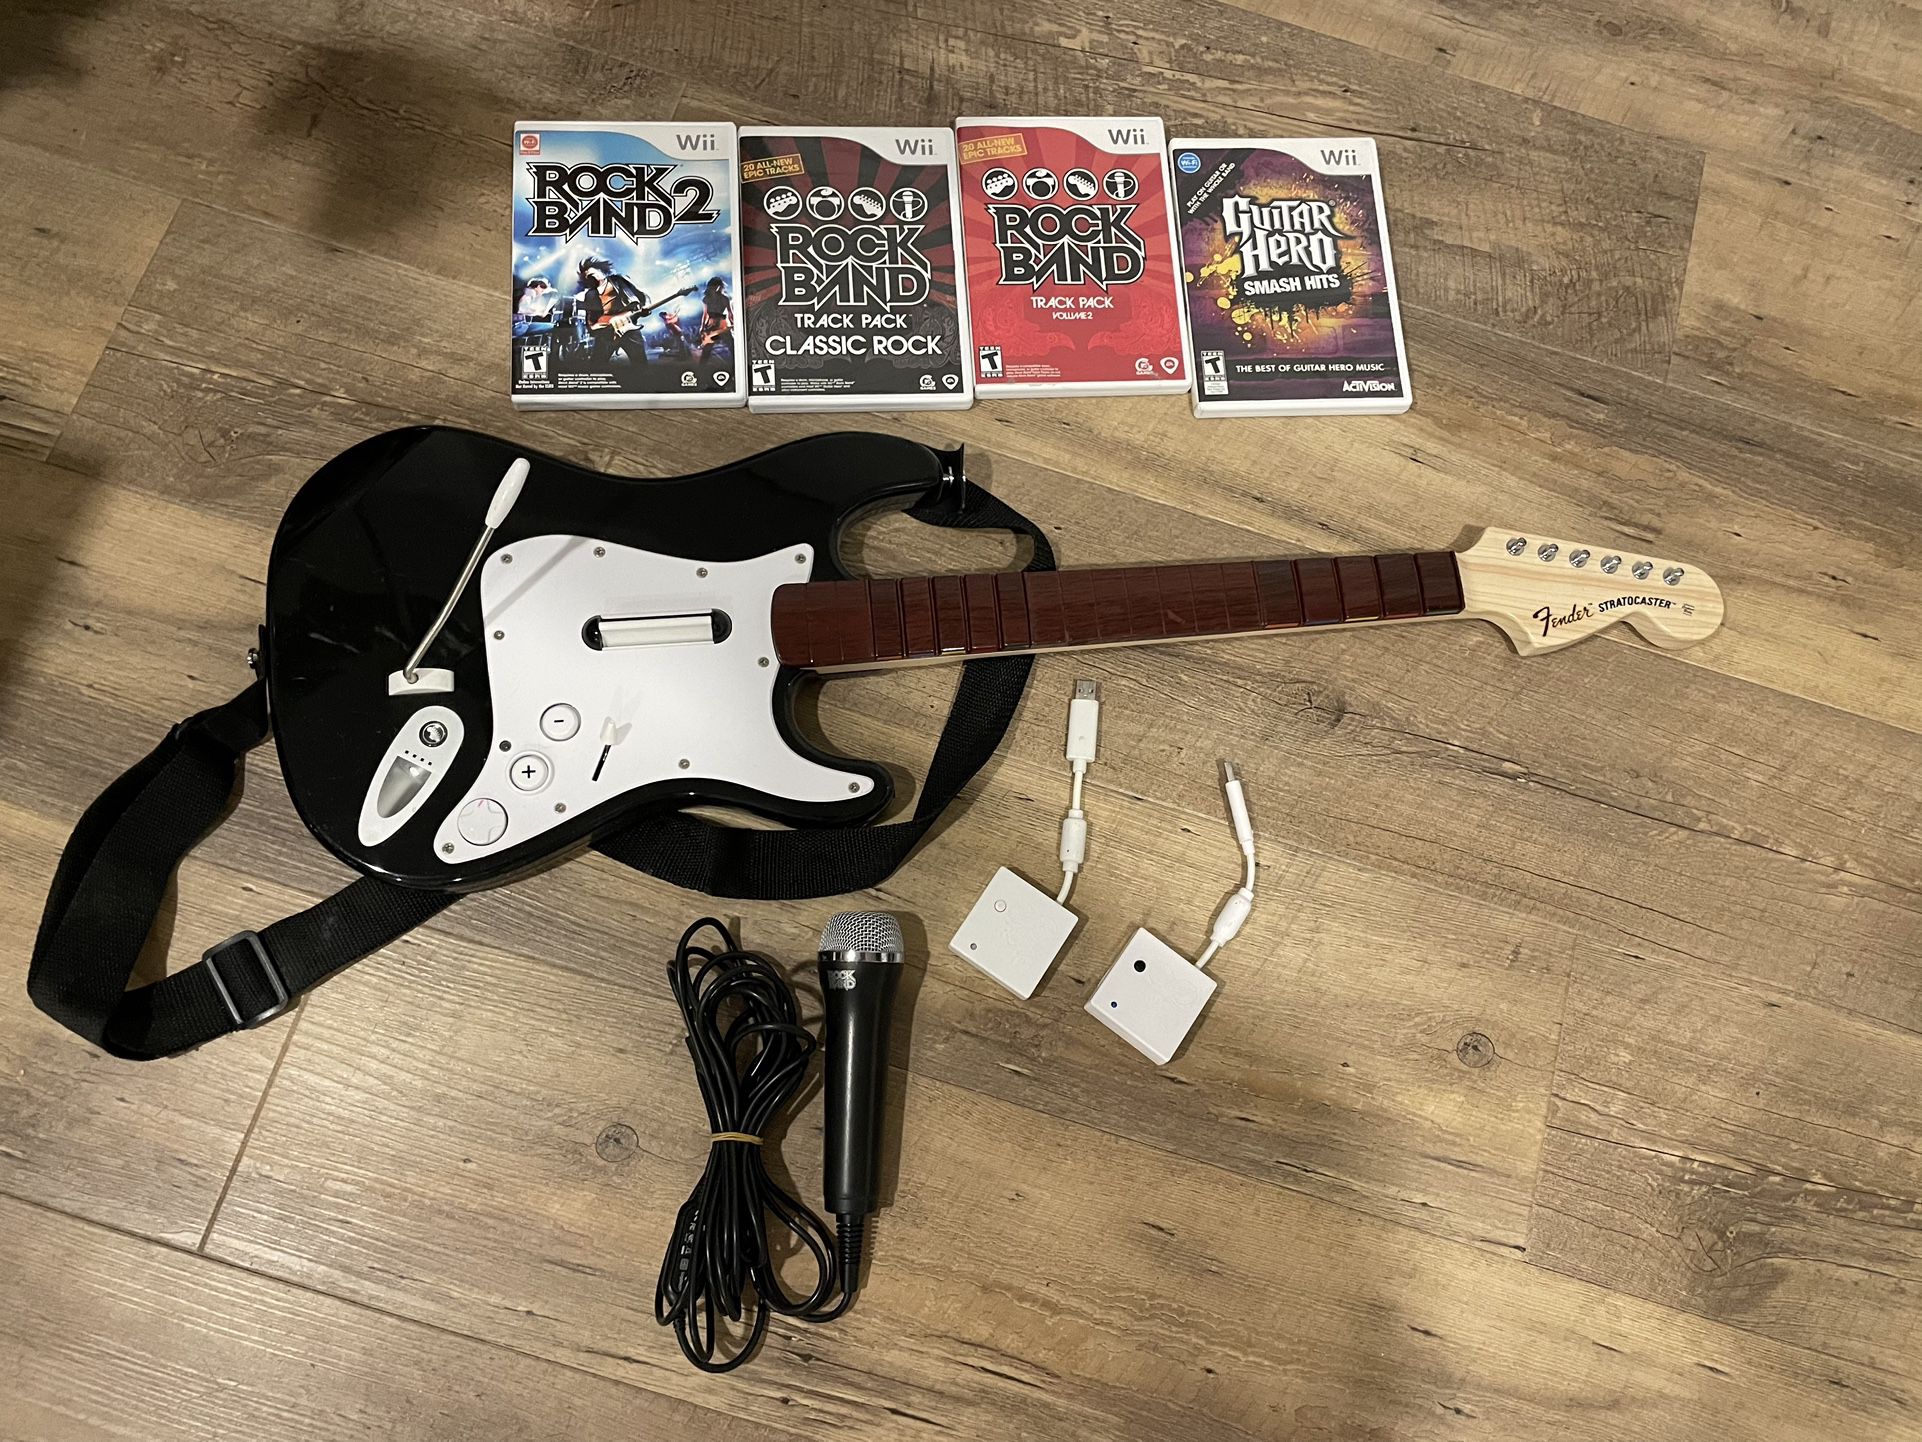 Wii Guitar, Mic, Games, Dongles